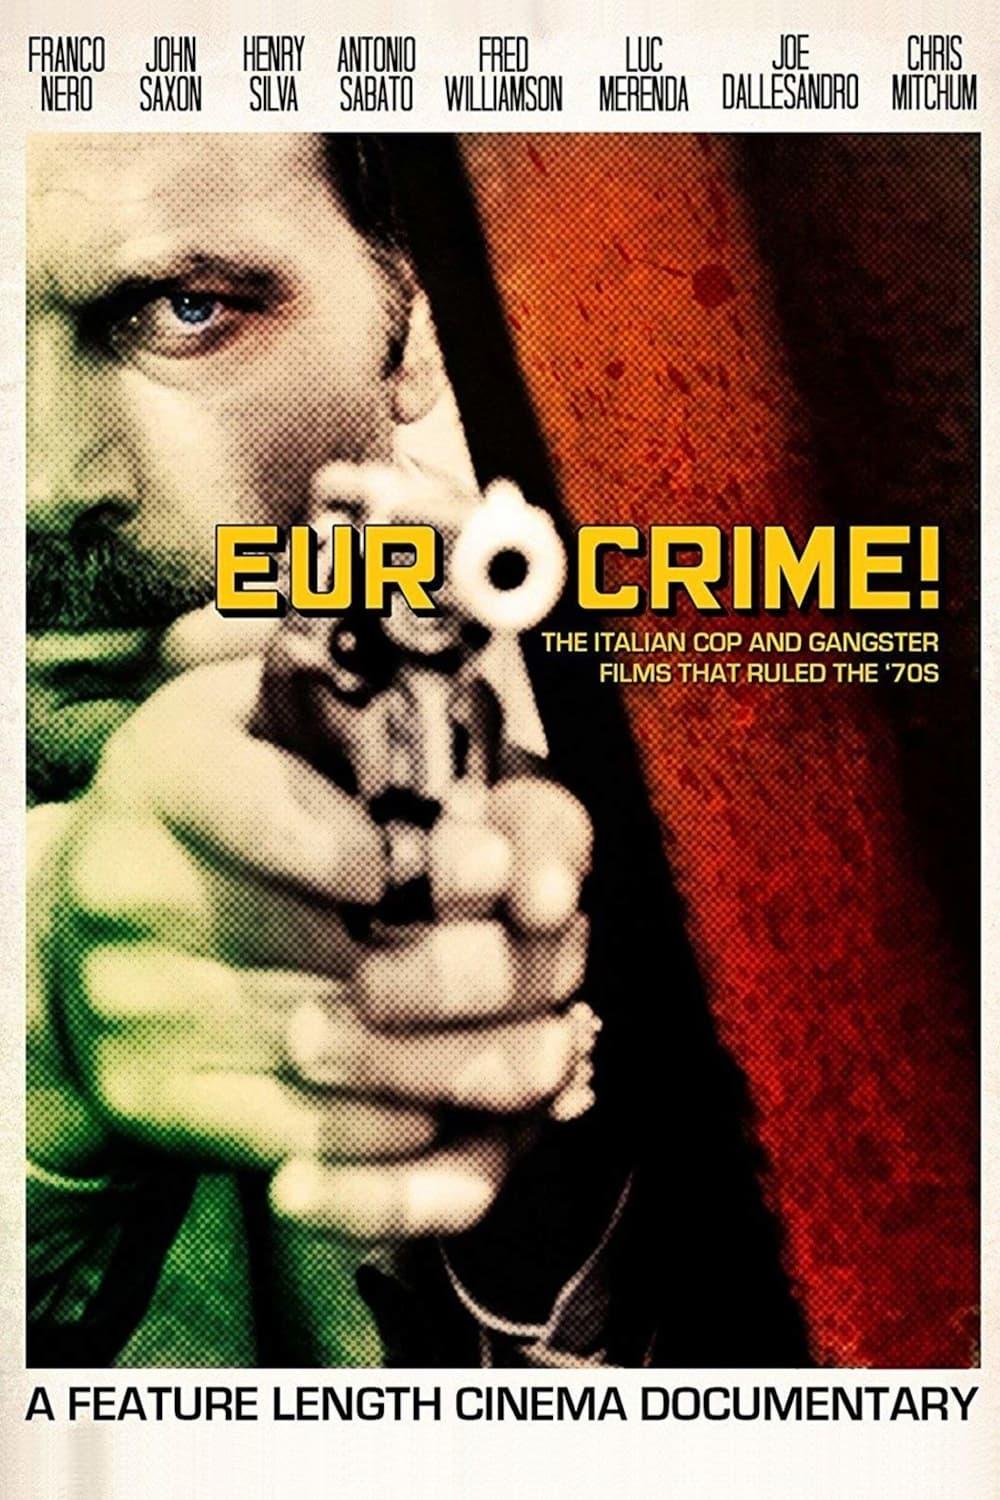 Eurocrime! The Italian Cop and Gangster Films That Ruled the '70s poster